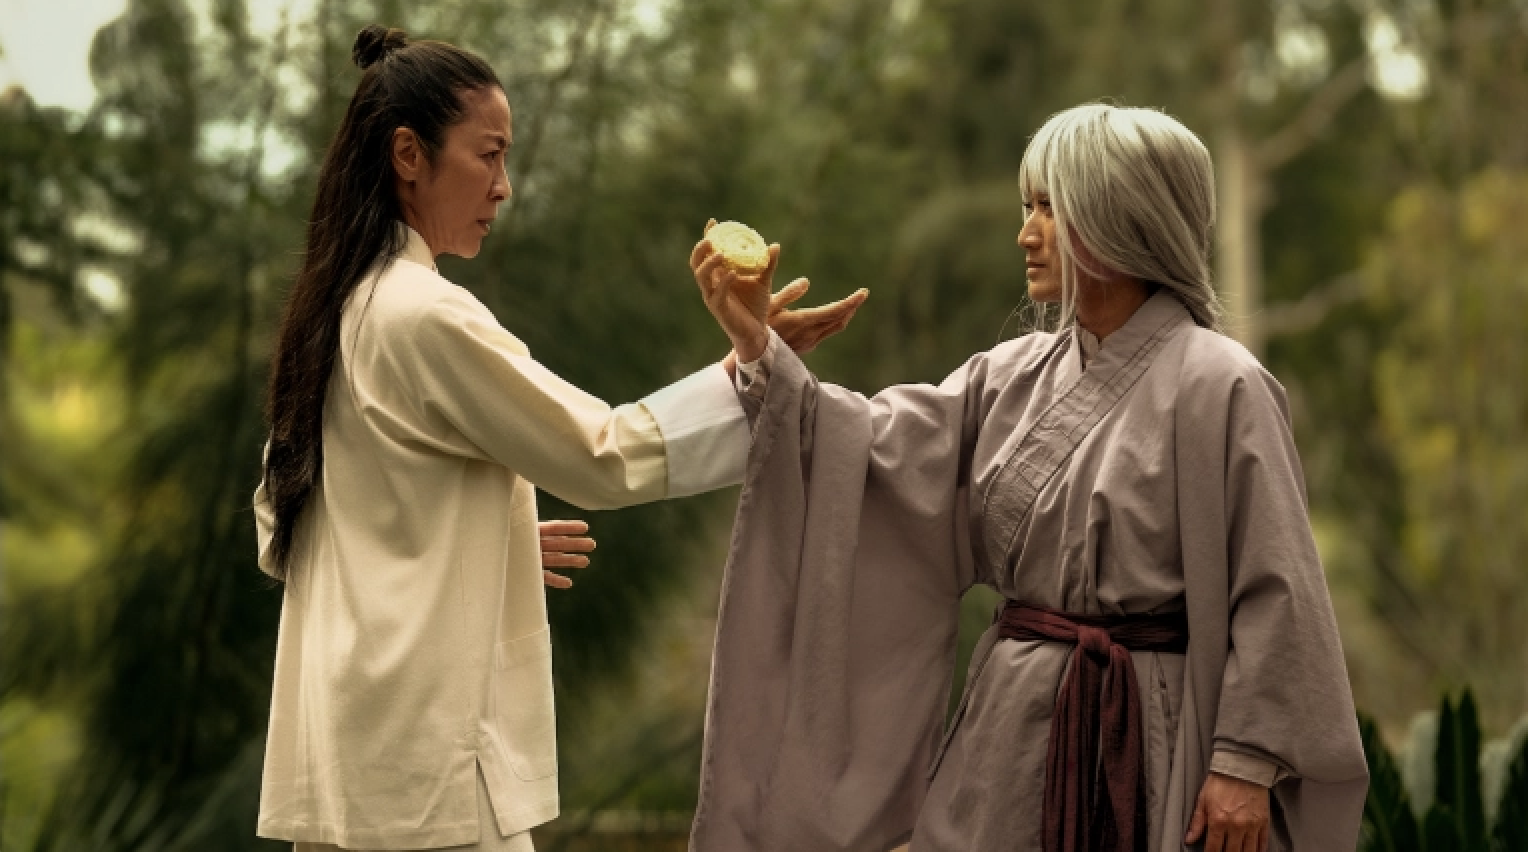 Michelle Yeoh as Evelyn training in marshal arts